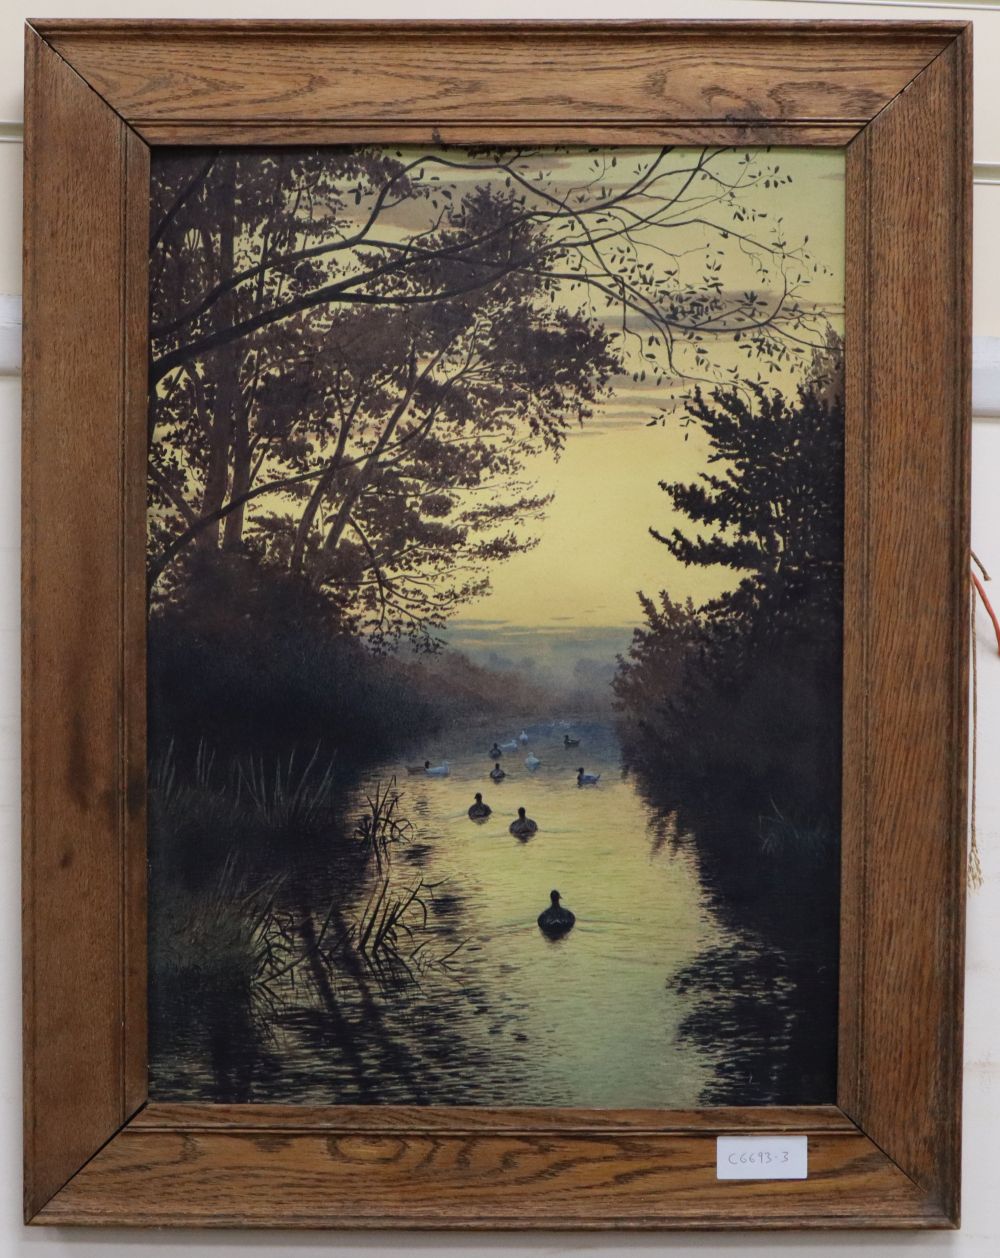 E.R. circa 1910, watercolour, Ducks on the river at sunset, initialled, 54 x 39cm